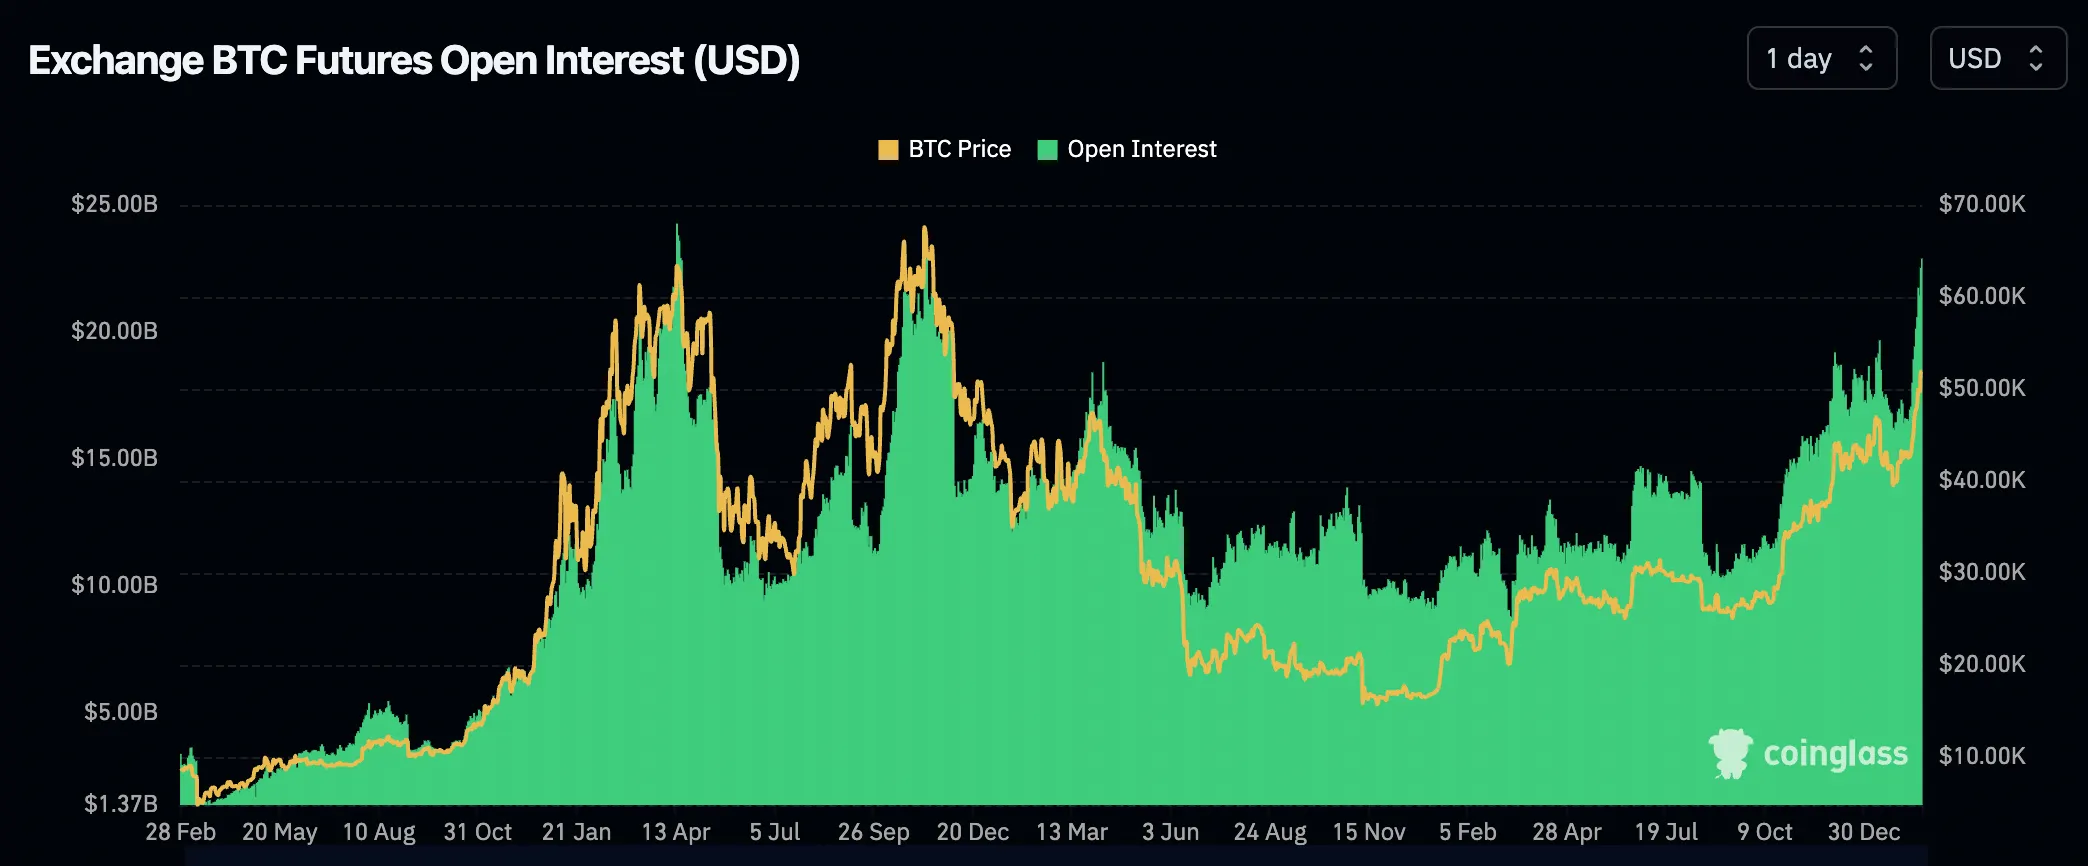 coinglass open interest bitcoin contracts